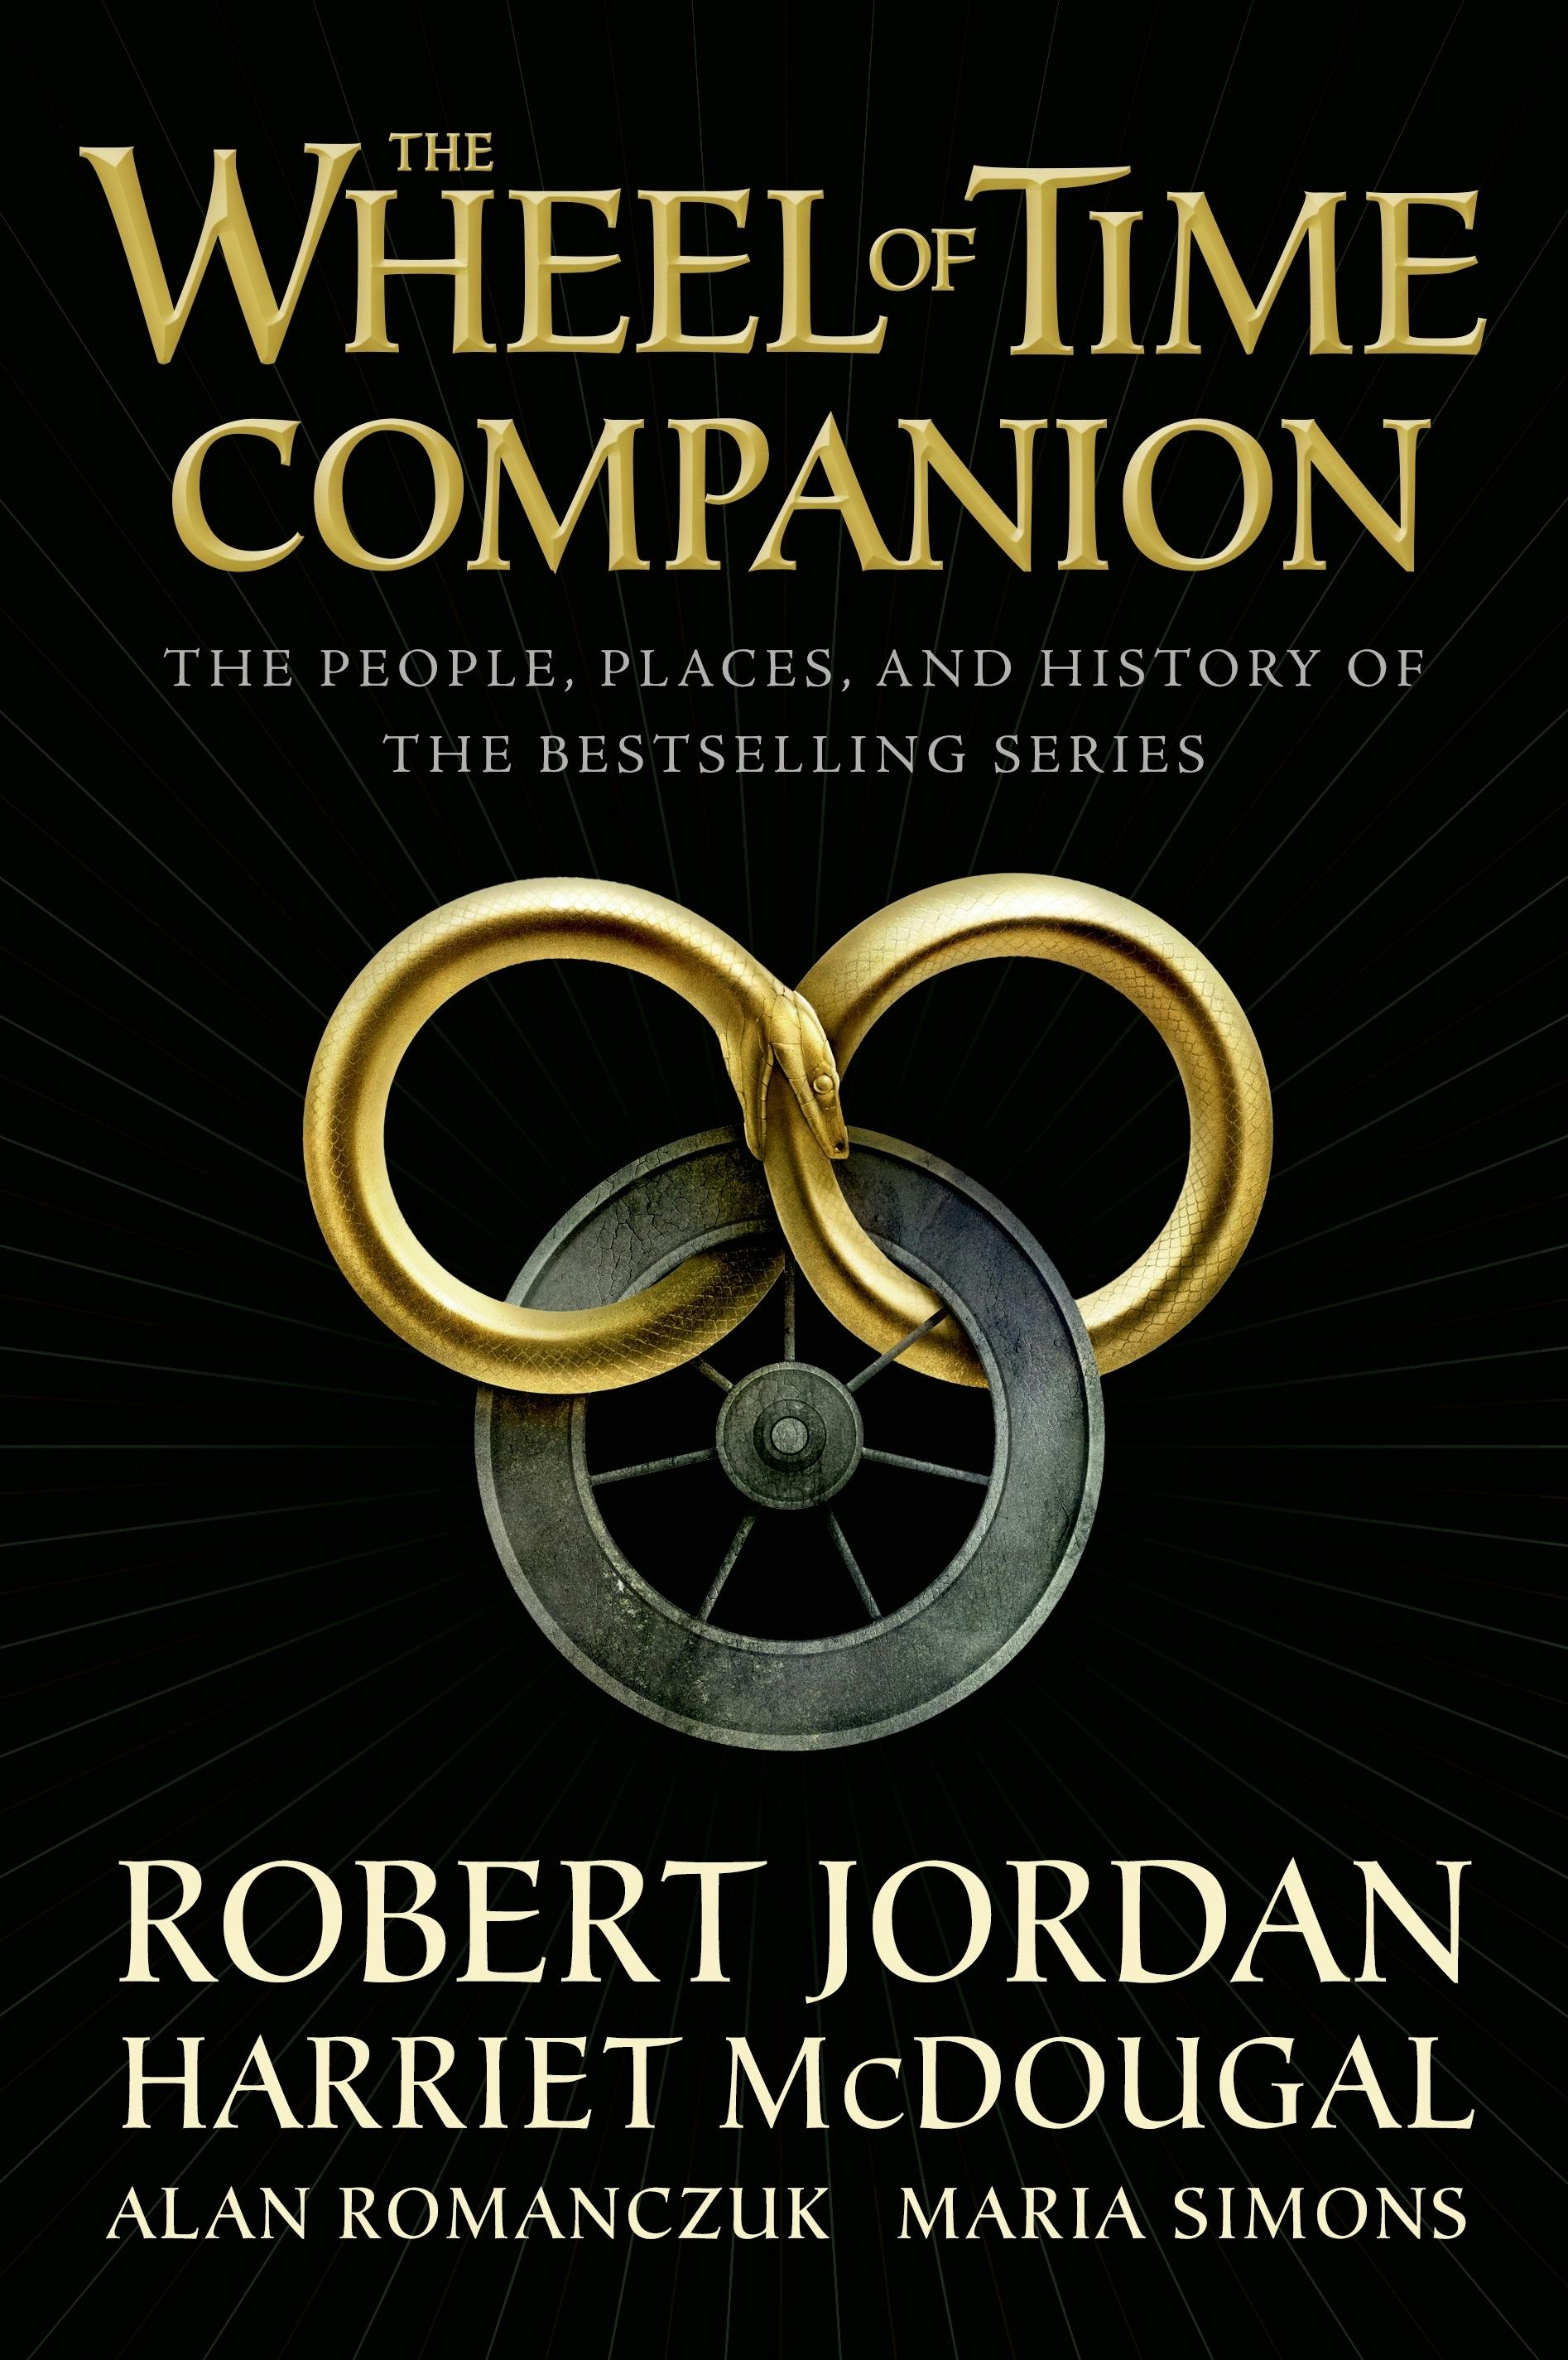 Cover for the book titled as: The Wheel of Time Companion